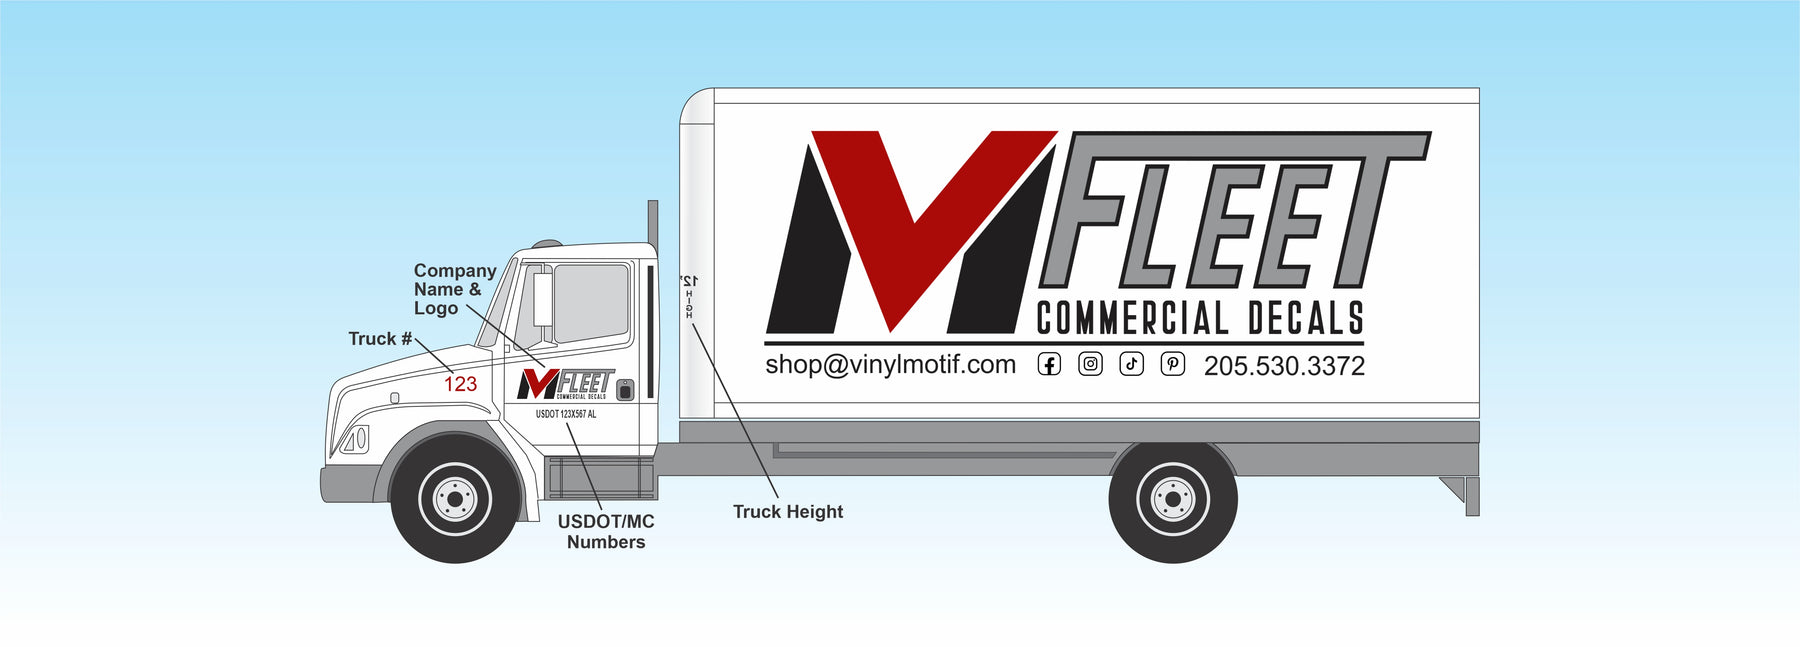 Commercial box truck with company name and logo, truck #, USDOT #, and truck height decals